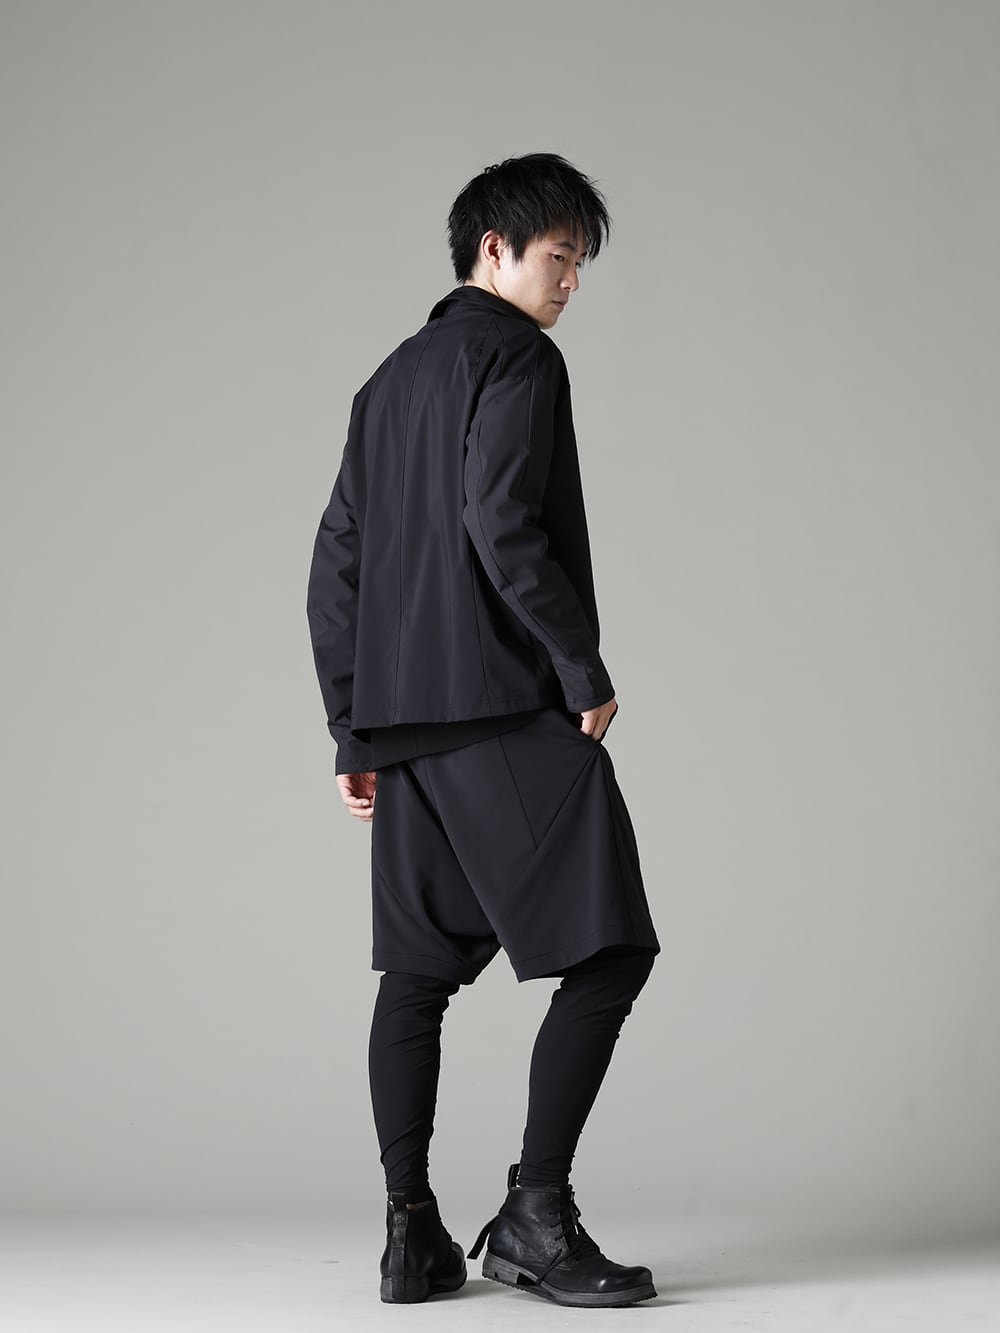 DEVOA EXIST 22-23AW ”Layered FASCINATE Dry Stretch - Pants BLOG Skin”